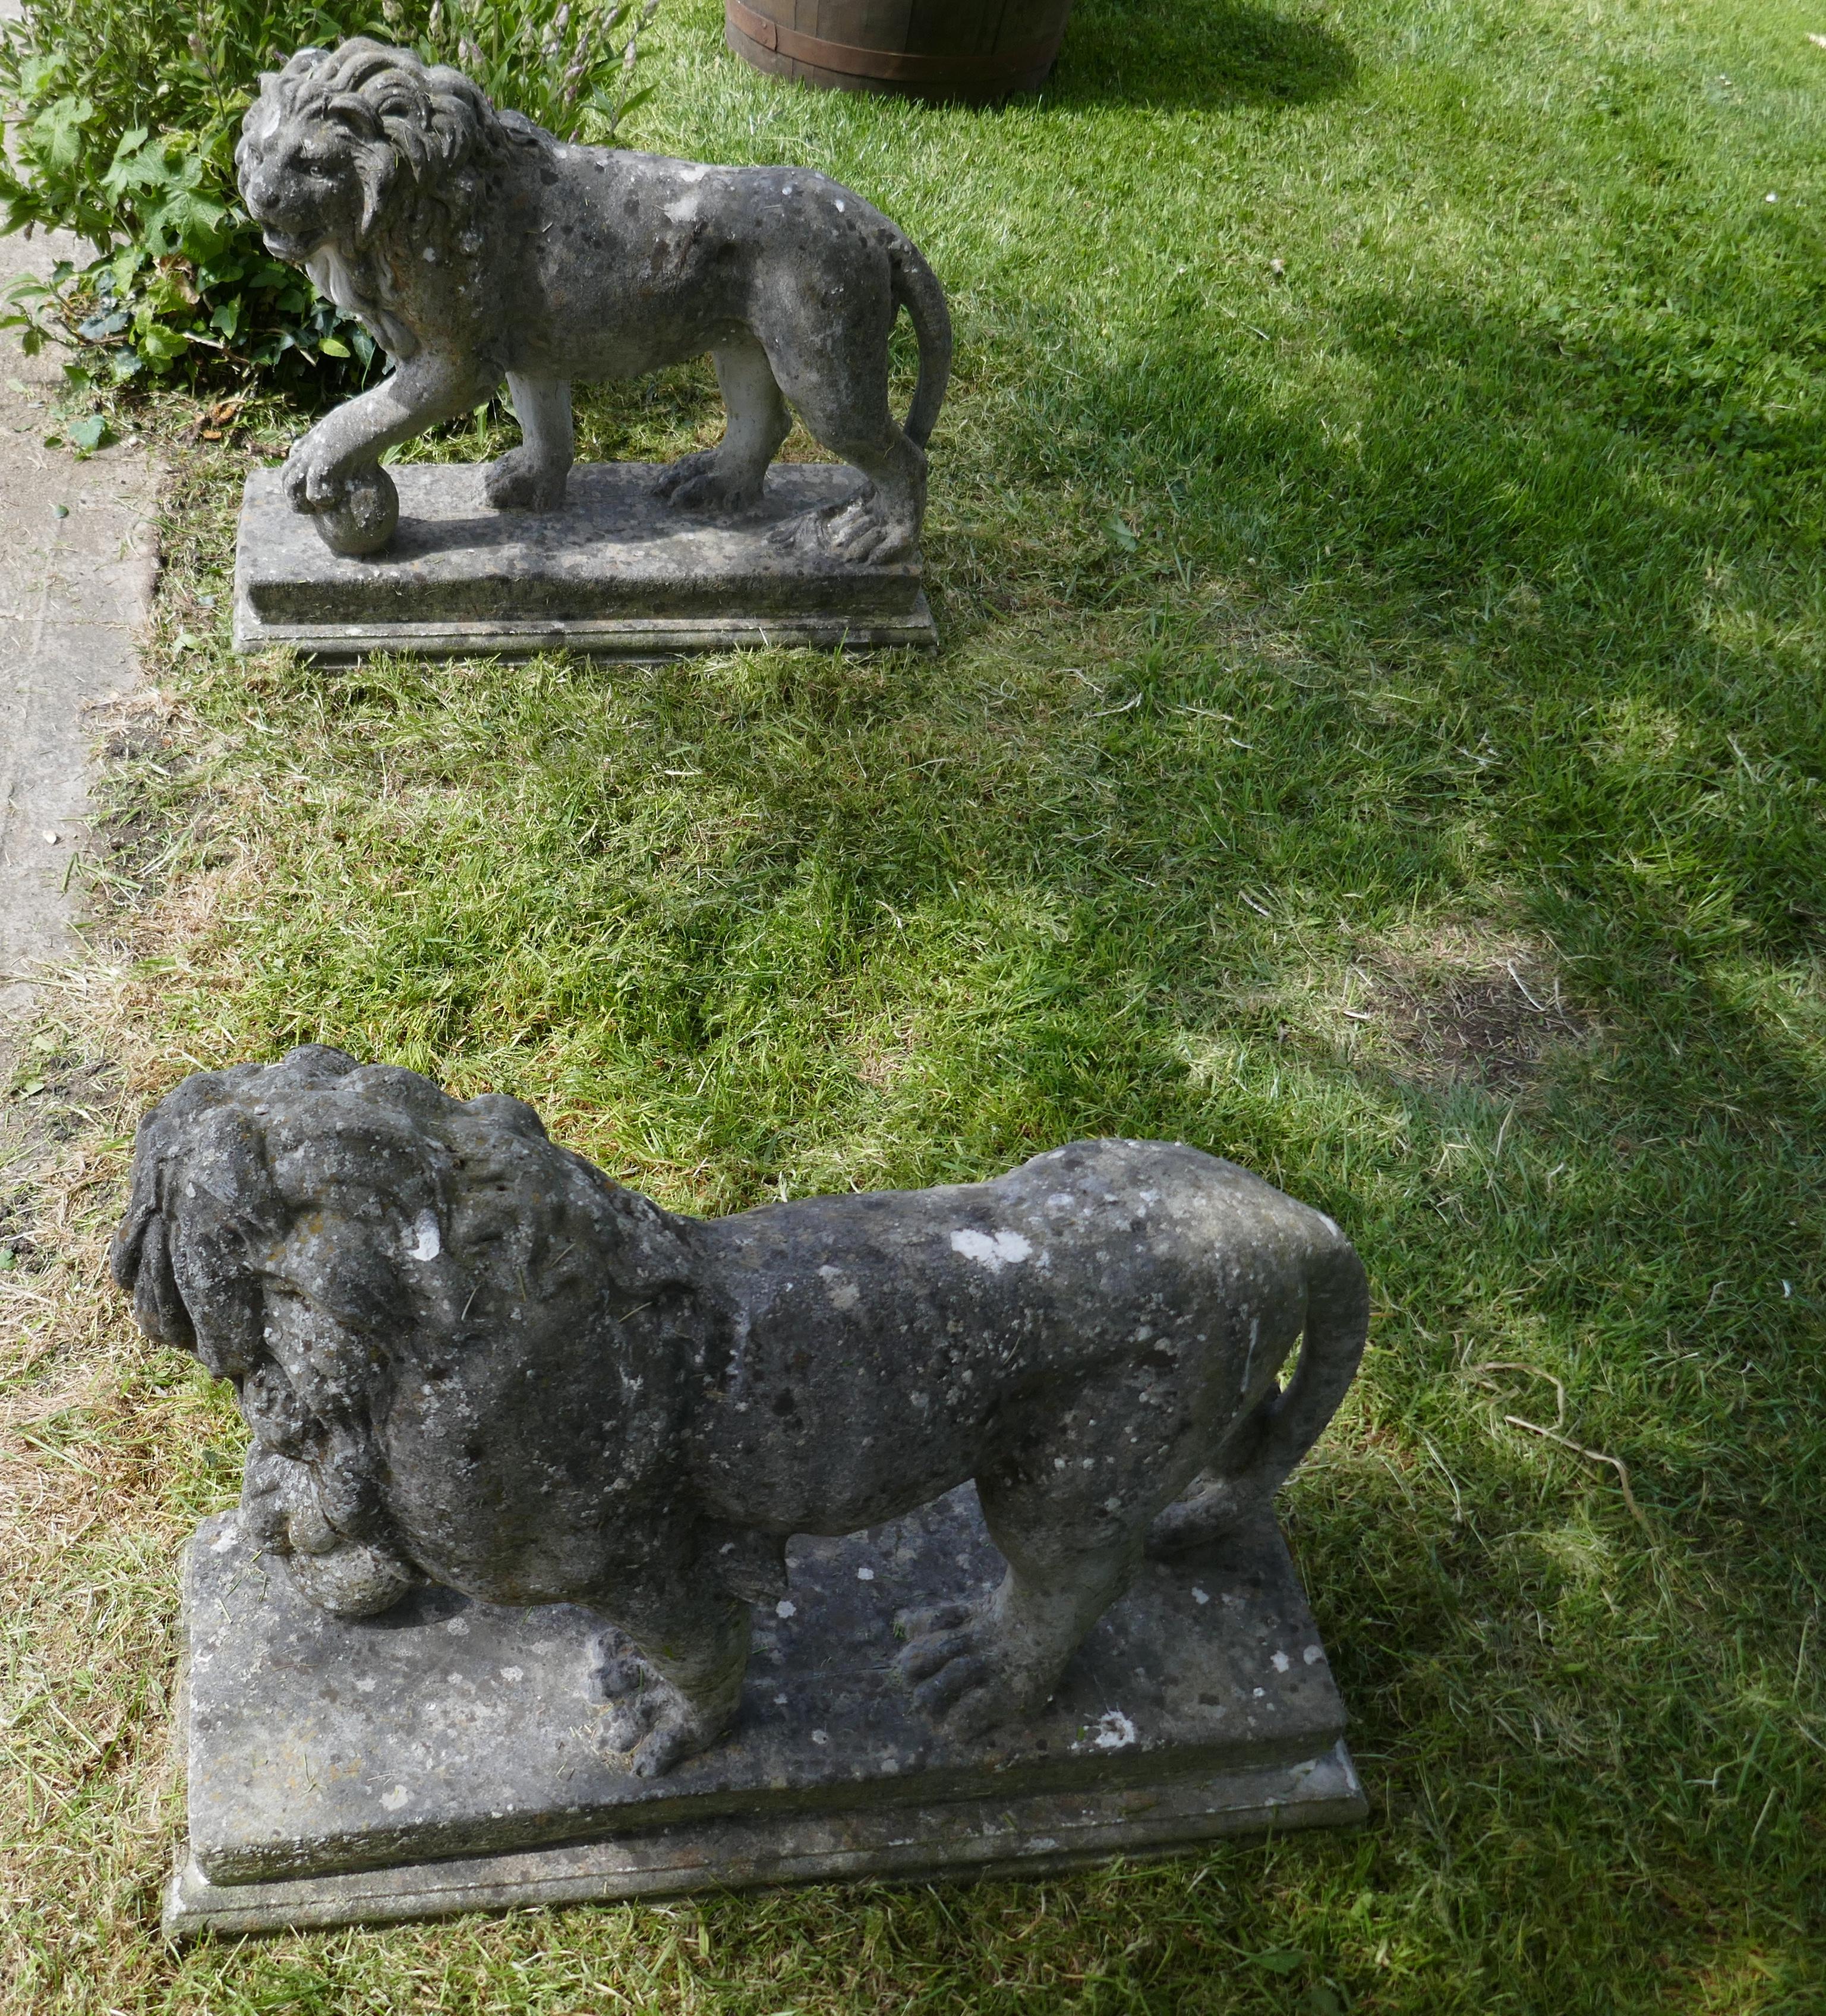 A pair of large stone garden entrance guardian lions


A pair of large sculptures of English stone standing male lions with paws on an orb

The sculptures depict standing Male Lions with an orb under one paw, the lions are looking to one side